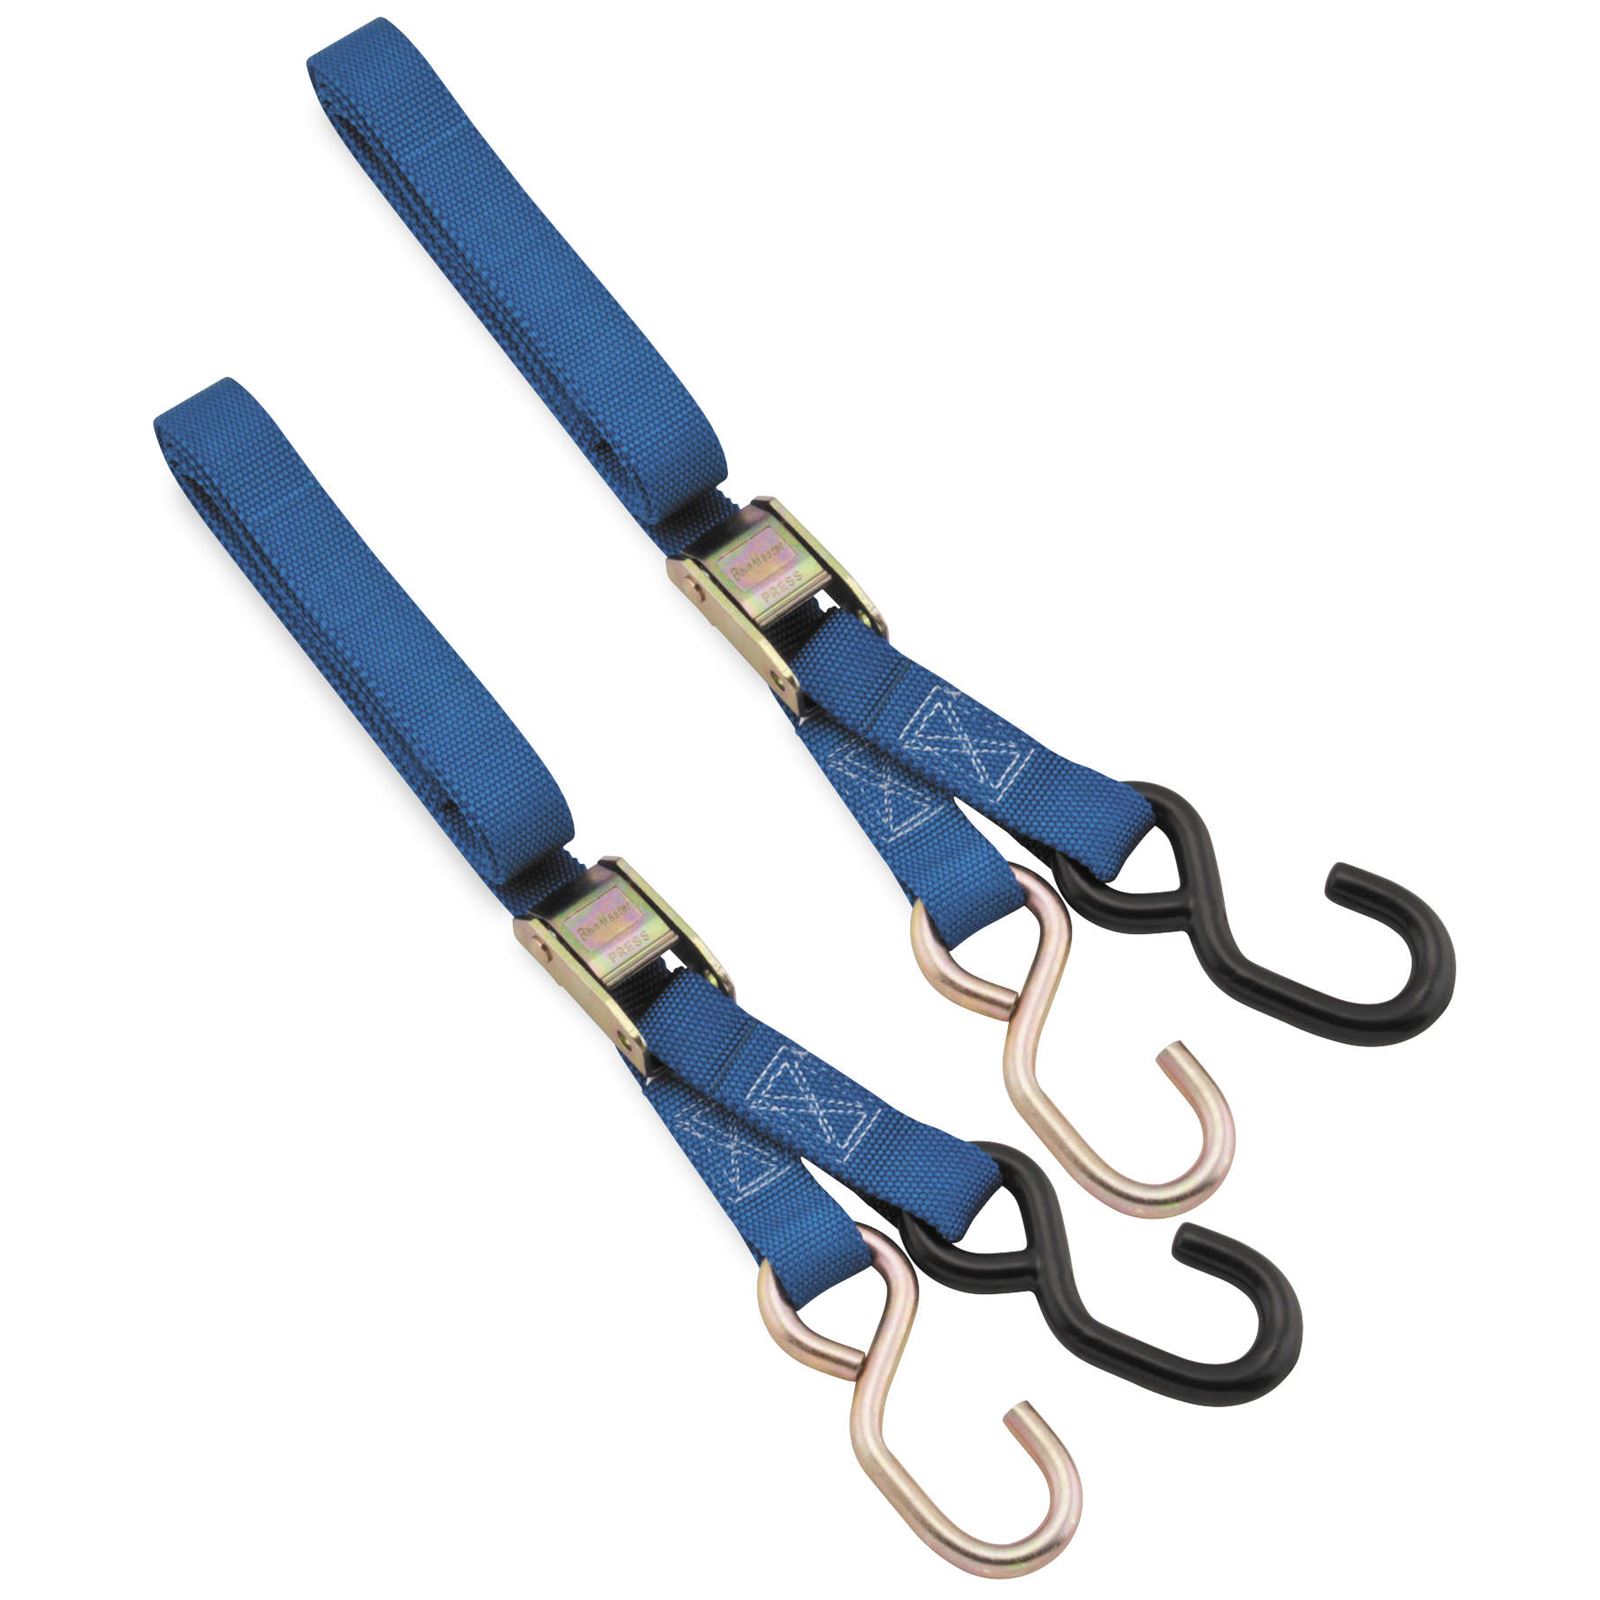  Heavy Duty Ratchet Strap 8' x 1-1/2 Motorcycle Ratchet Tie  Down Straps (Pack of 4) with Safety Snap Hooks & Soft-tie D Ring - Secure  Motorcycles, Dirt Bikes, ATVs, UTVs, and